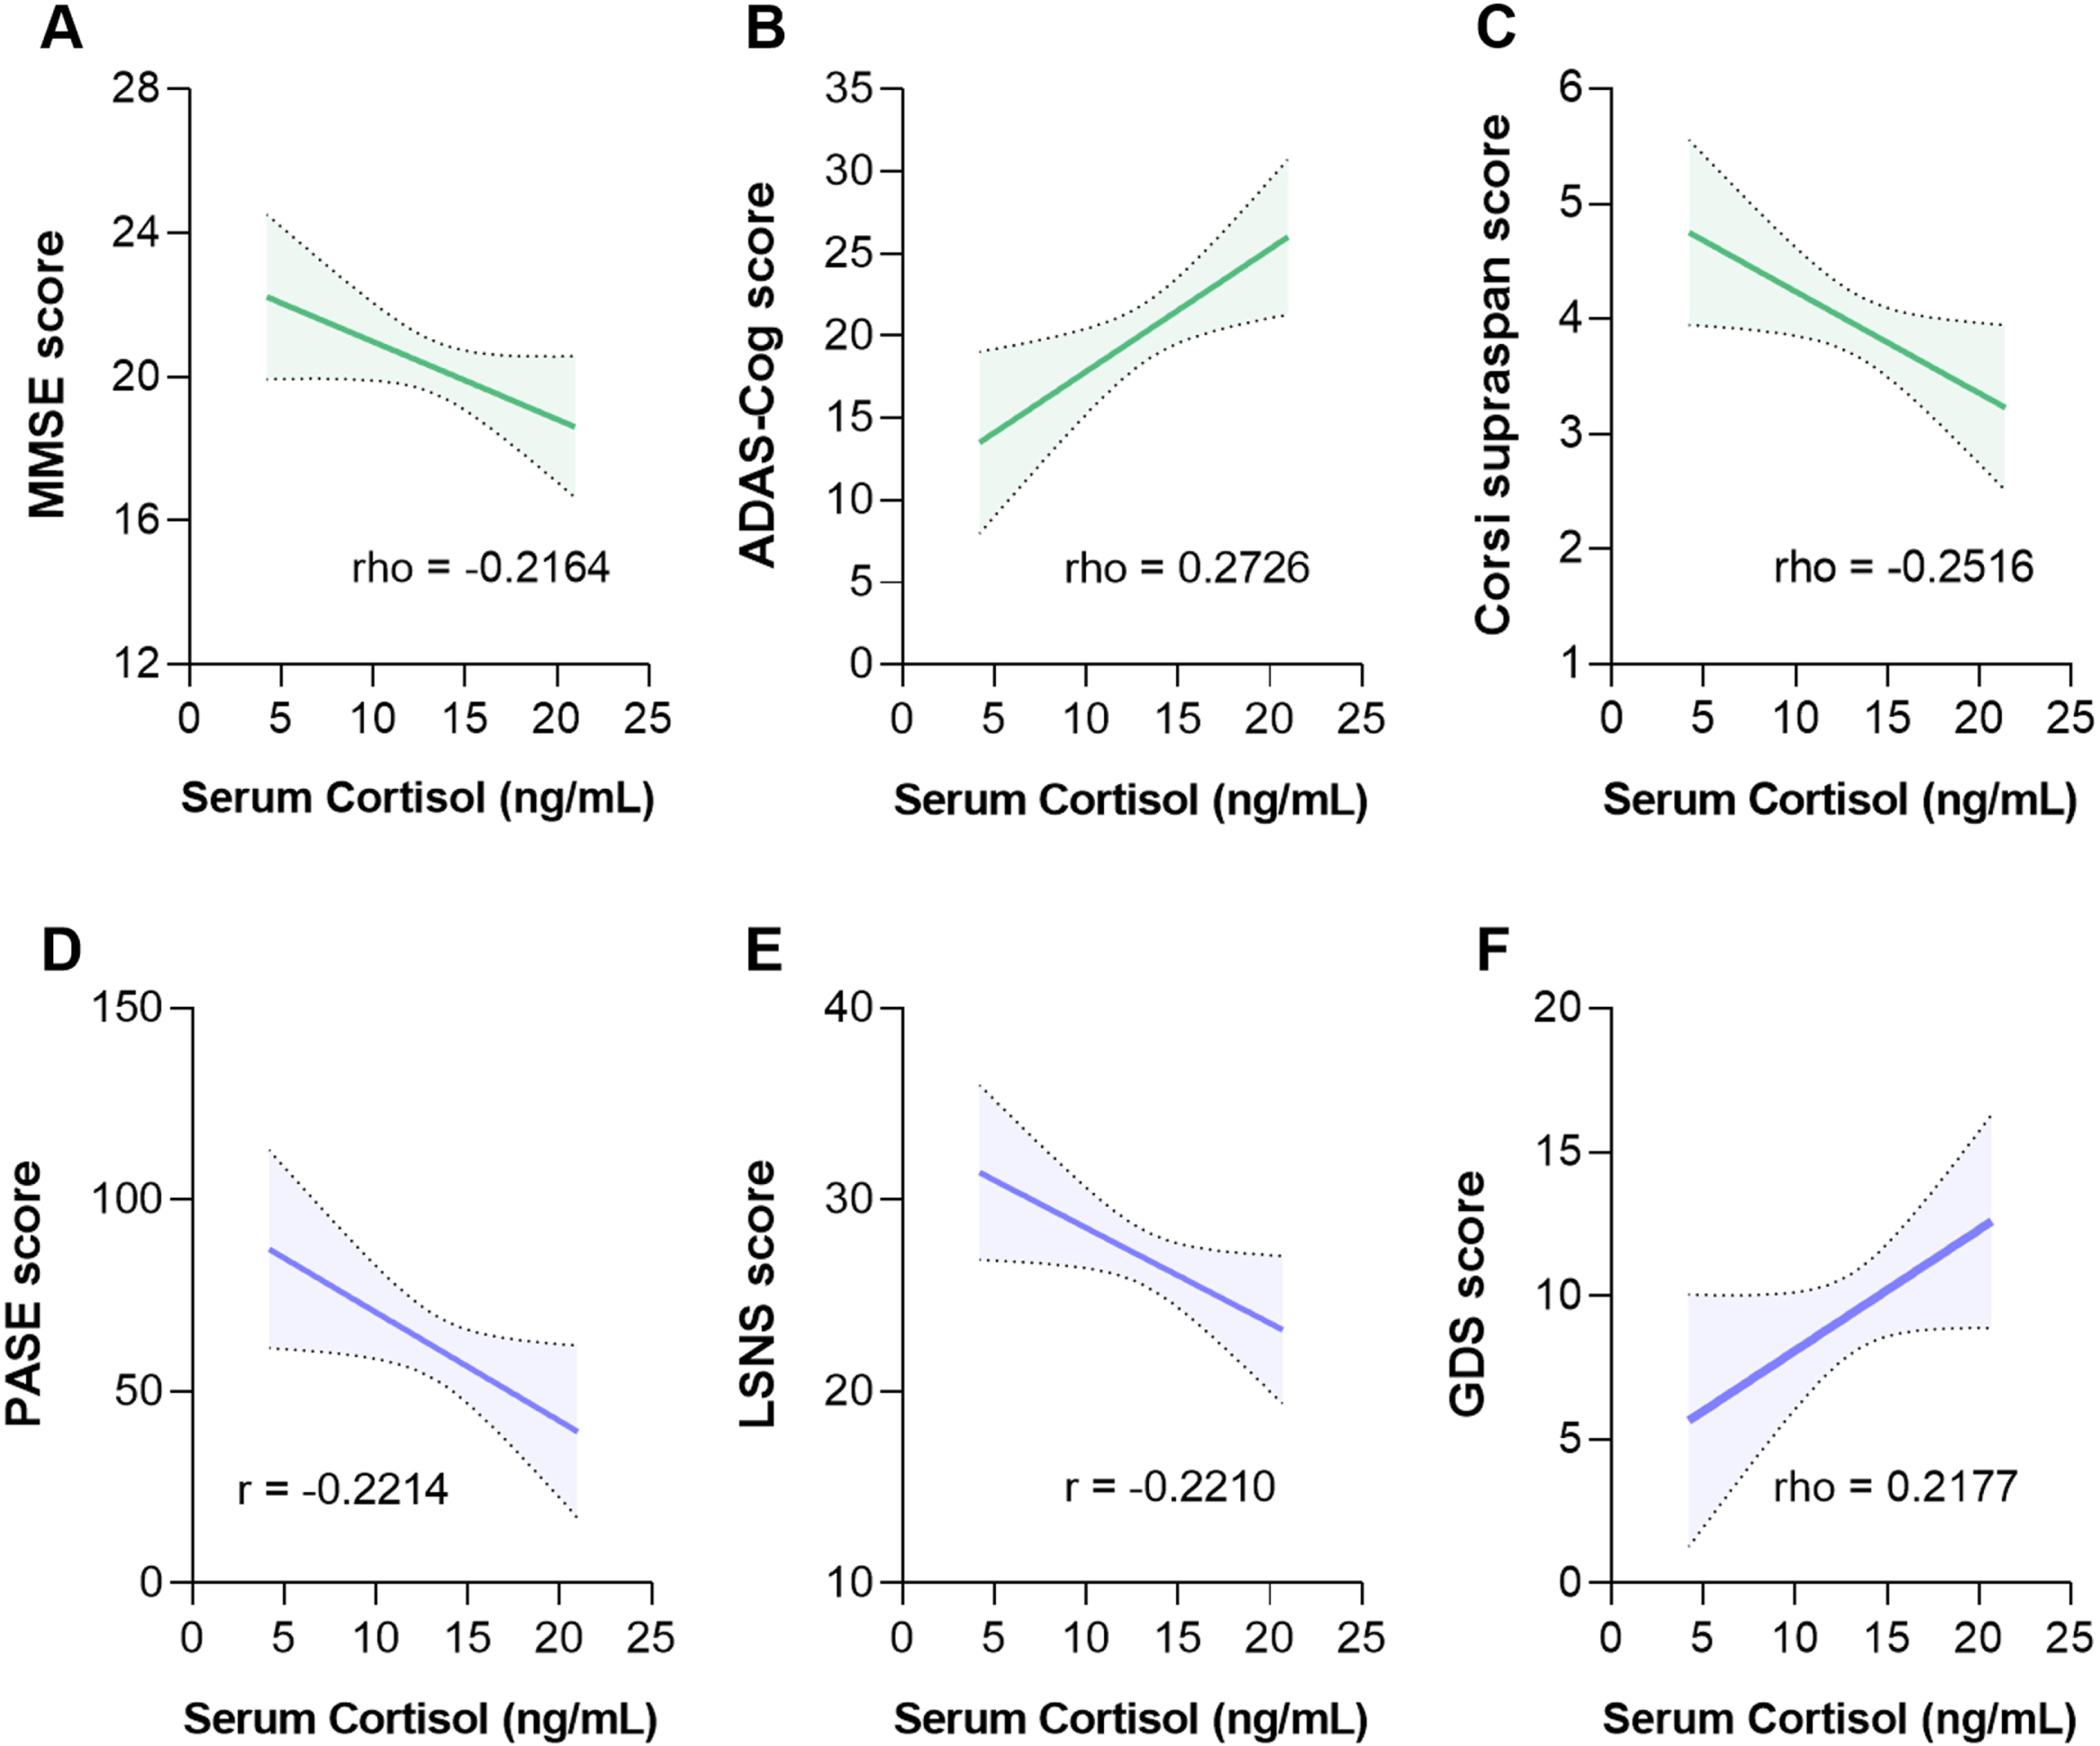 Serum cortisol level significantly correlates with cognitive performances and lifestyle in patients with Alzheimer’s disease. The higher the cortisol level, the worse the MMSE (A), the ADAS-Cog (B), and the Corsi supraspan (C) scores. The higher the serum cortisol level, the lower the physical activity (D), the lower the social network (E), and the higher the depressive mood (F). MMSE, Mini-Mental State Examination; ADAS-Cog, Alzheimer’s Disease Assessment Scale-Cognitive; PASE, Physical Activity Scale for Elderly; LSNS, Lubben Social Network Scale; GDS, Geriatric Depression Scale.